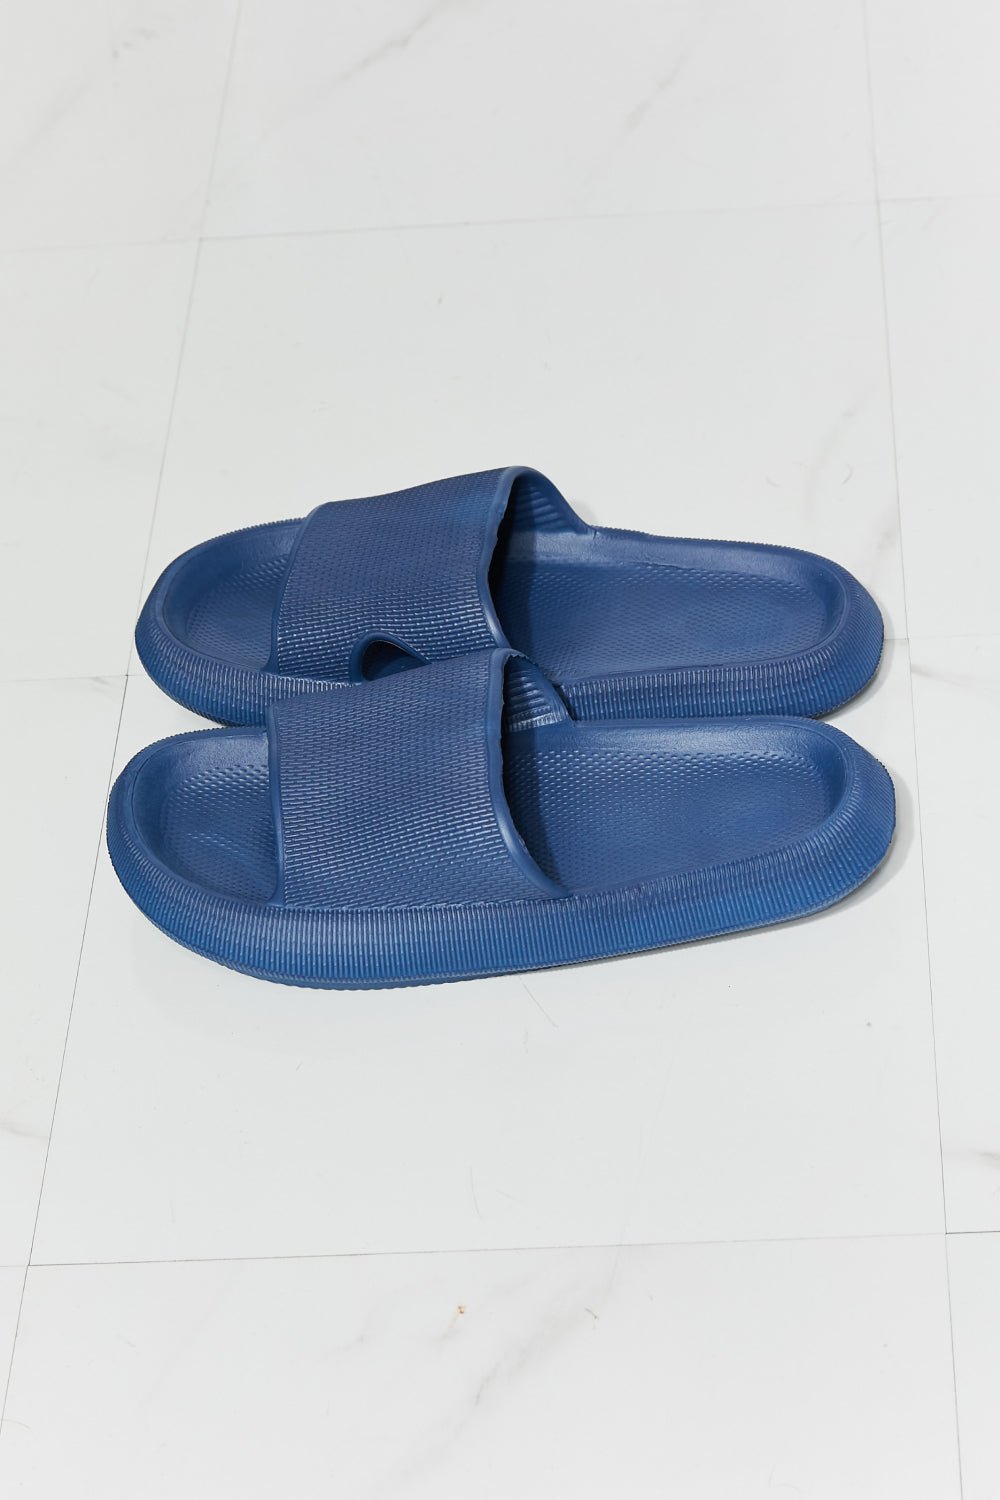 MMShoes Arms Around Me Open Toe Navy Slide - EMMY